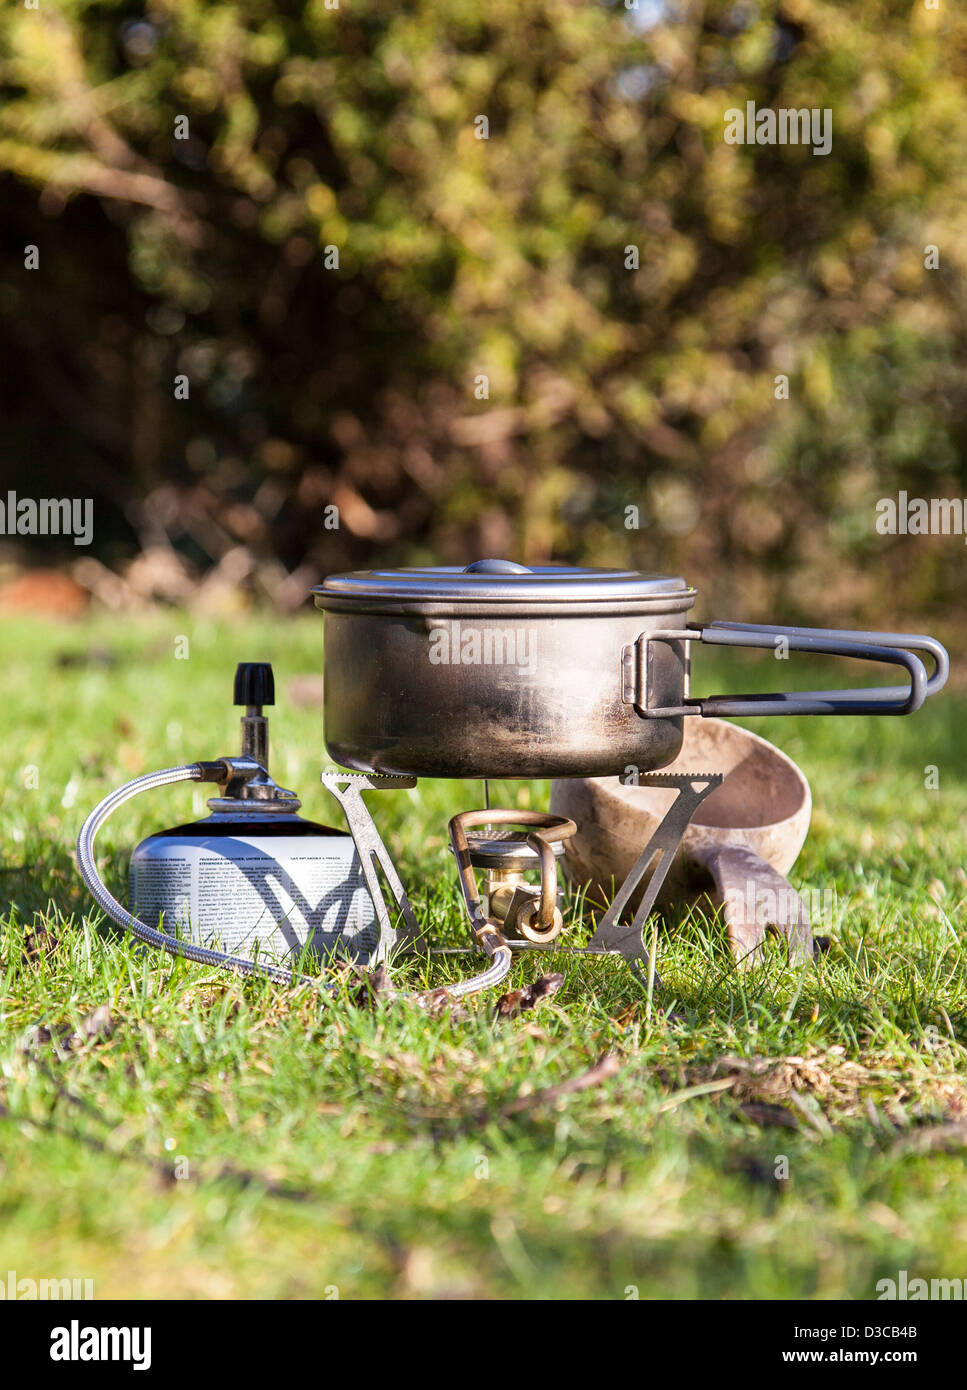 Camping Stove with Gas Canister and Wooden Mug Stock Photo